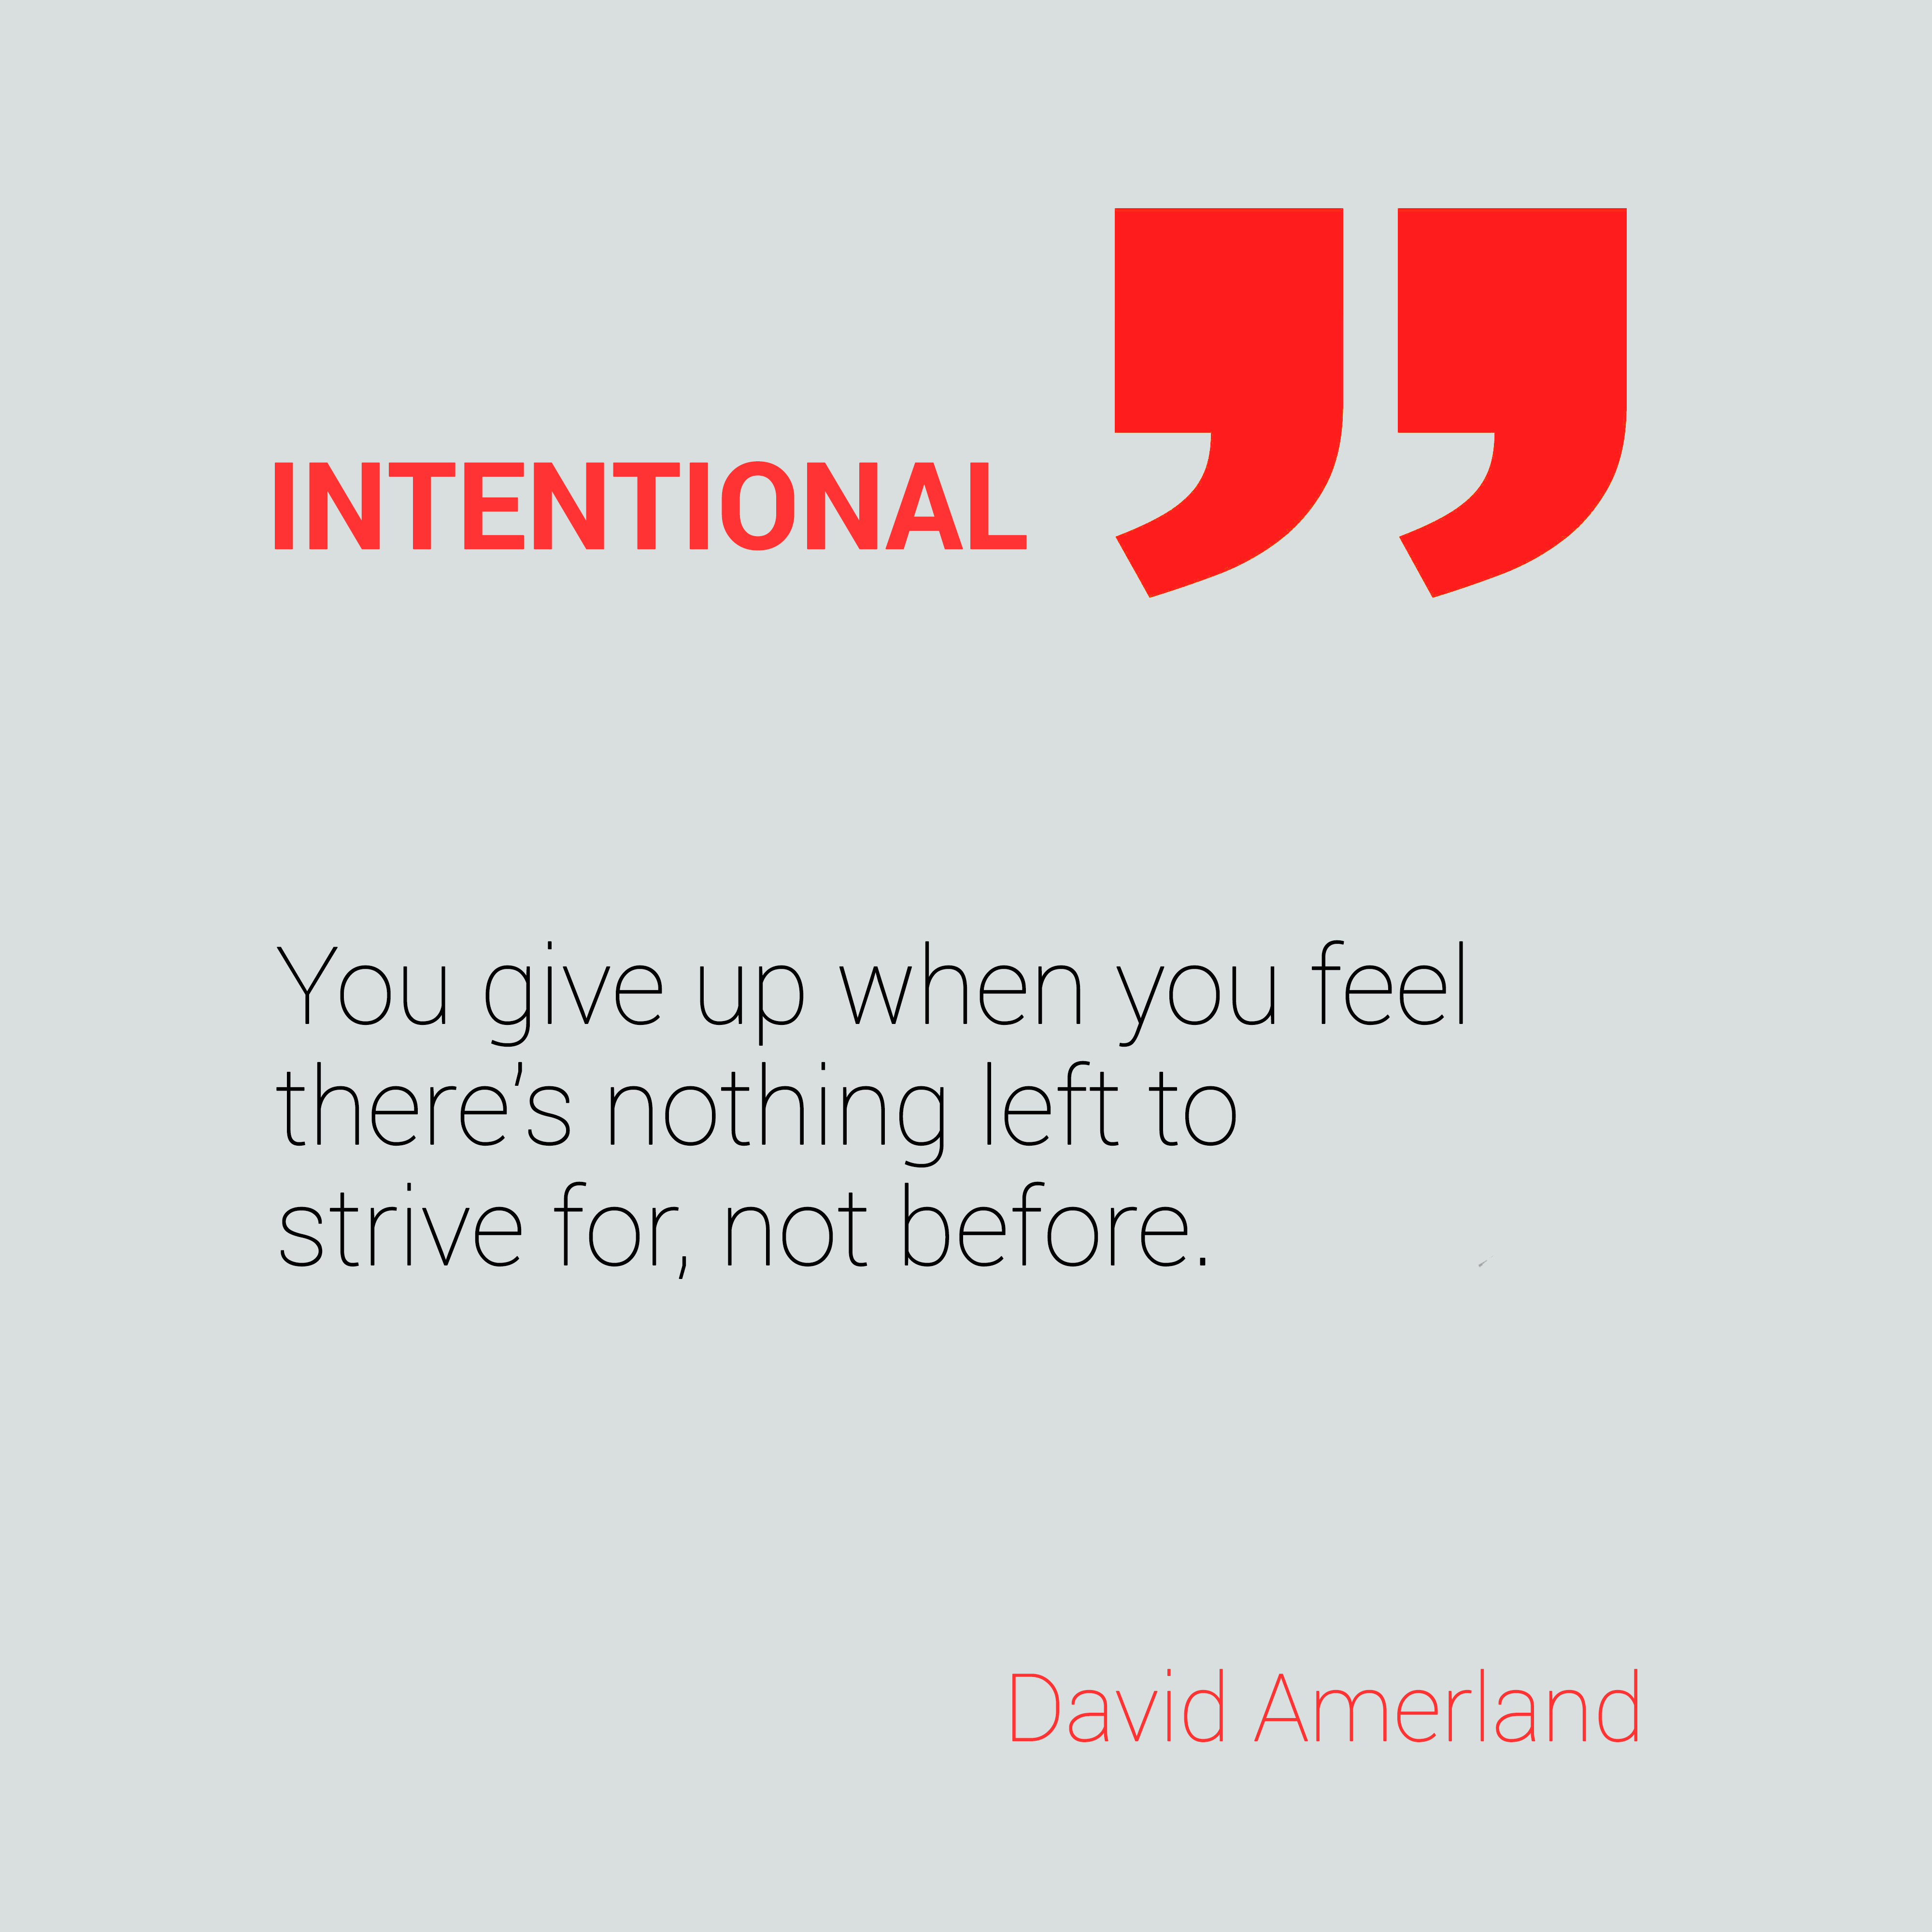 INTENTIONAL 5 5

You give up when you fee
there's nothing left to
strive for, not before.

David Amerland